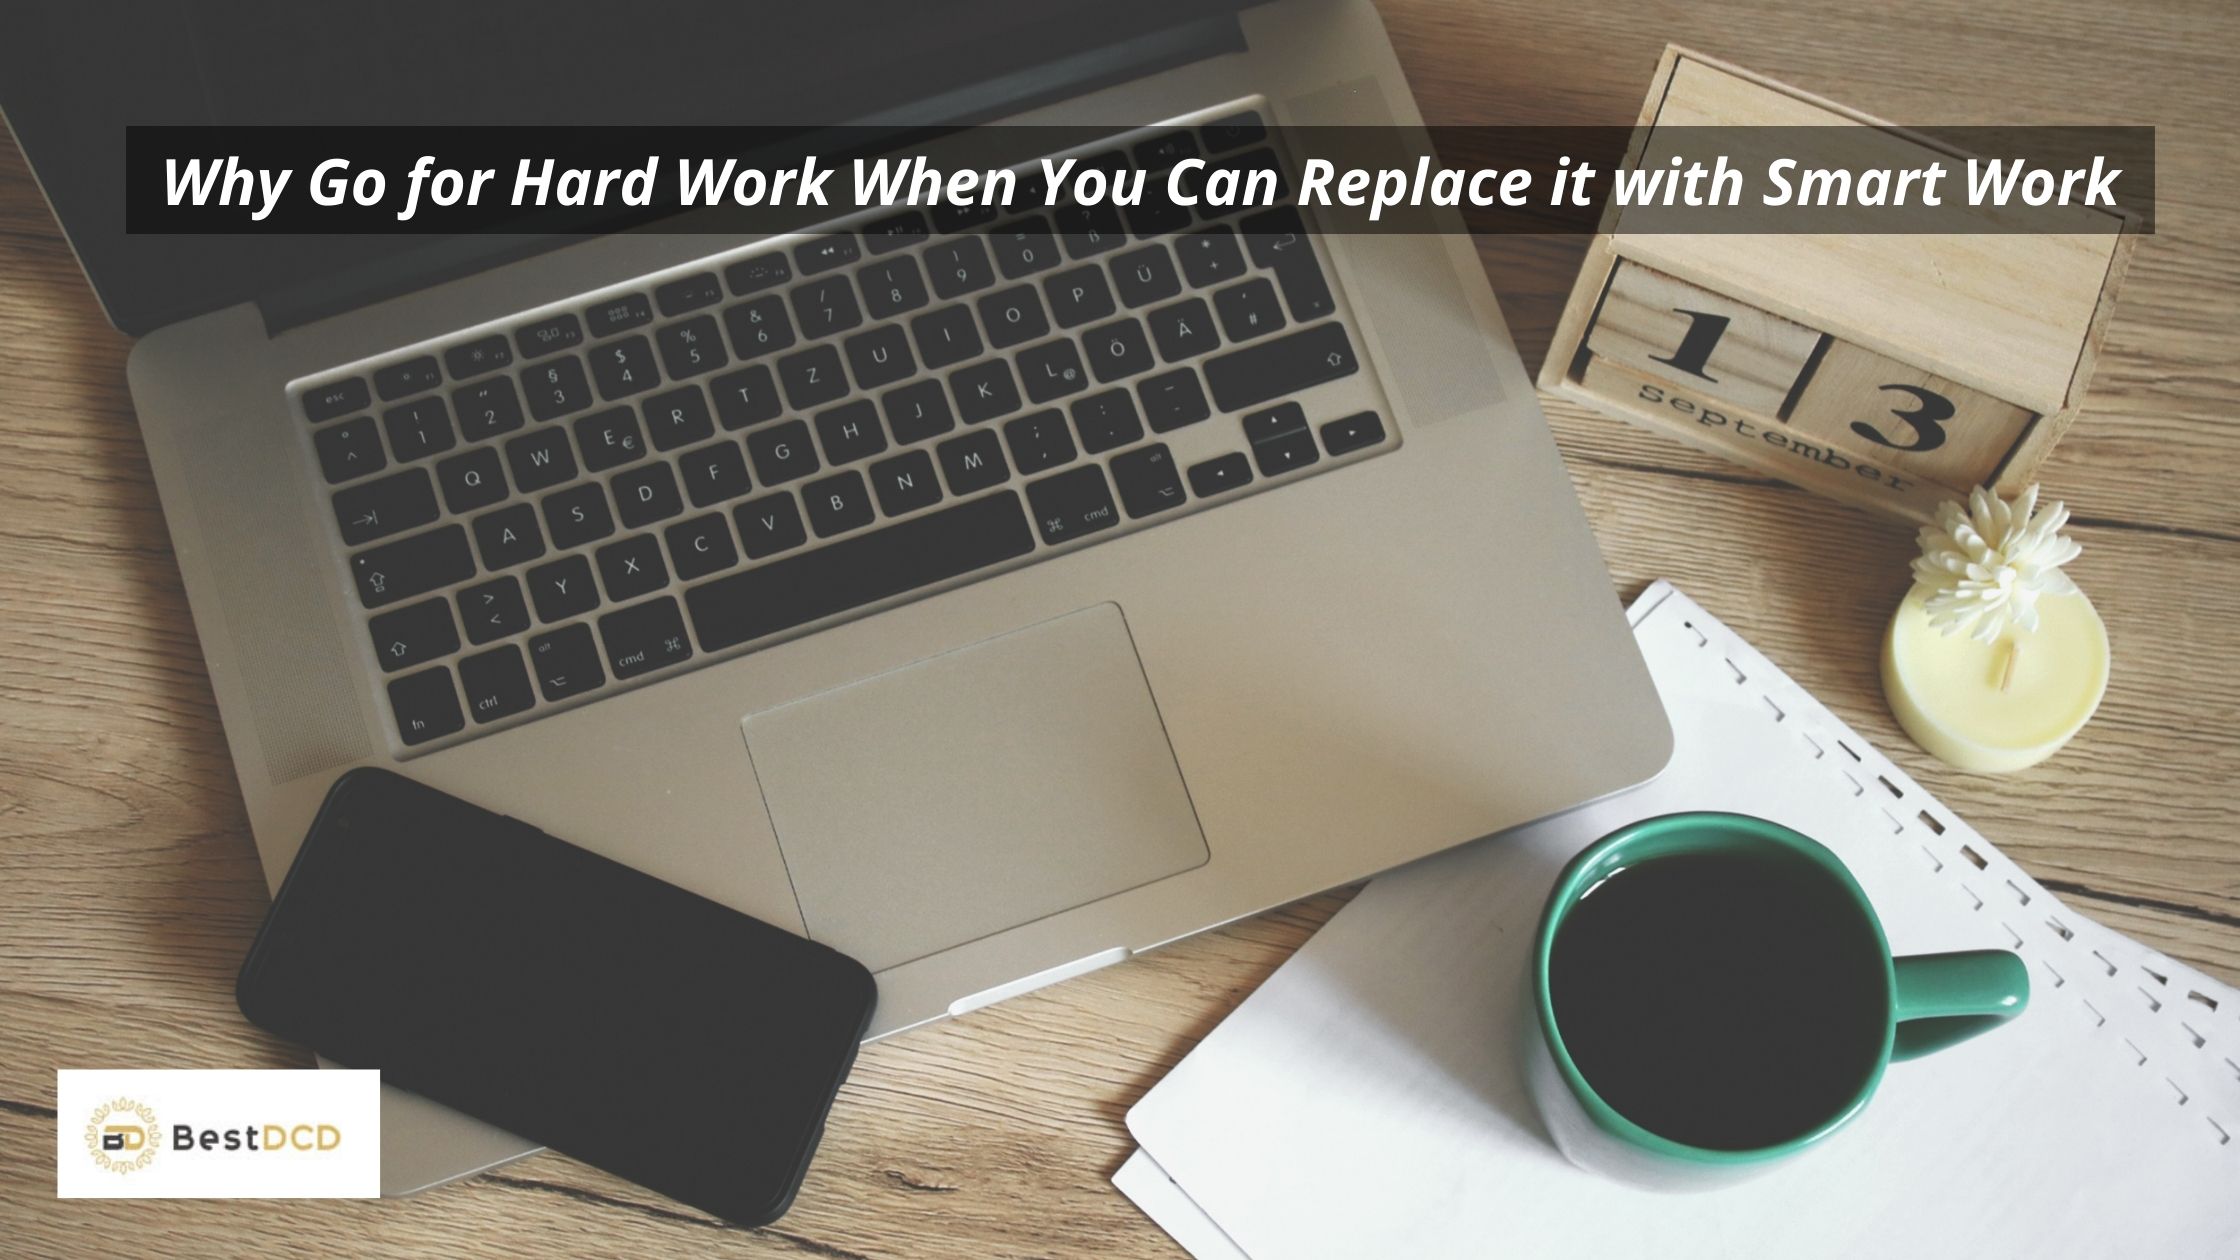 Why go for hard work when you can replace it with smart work